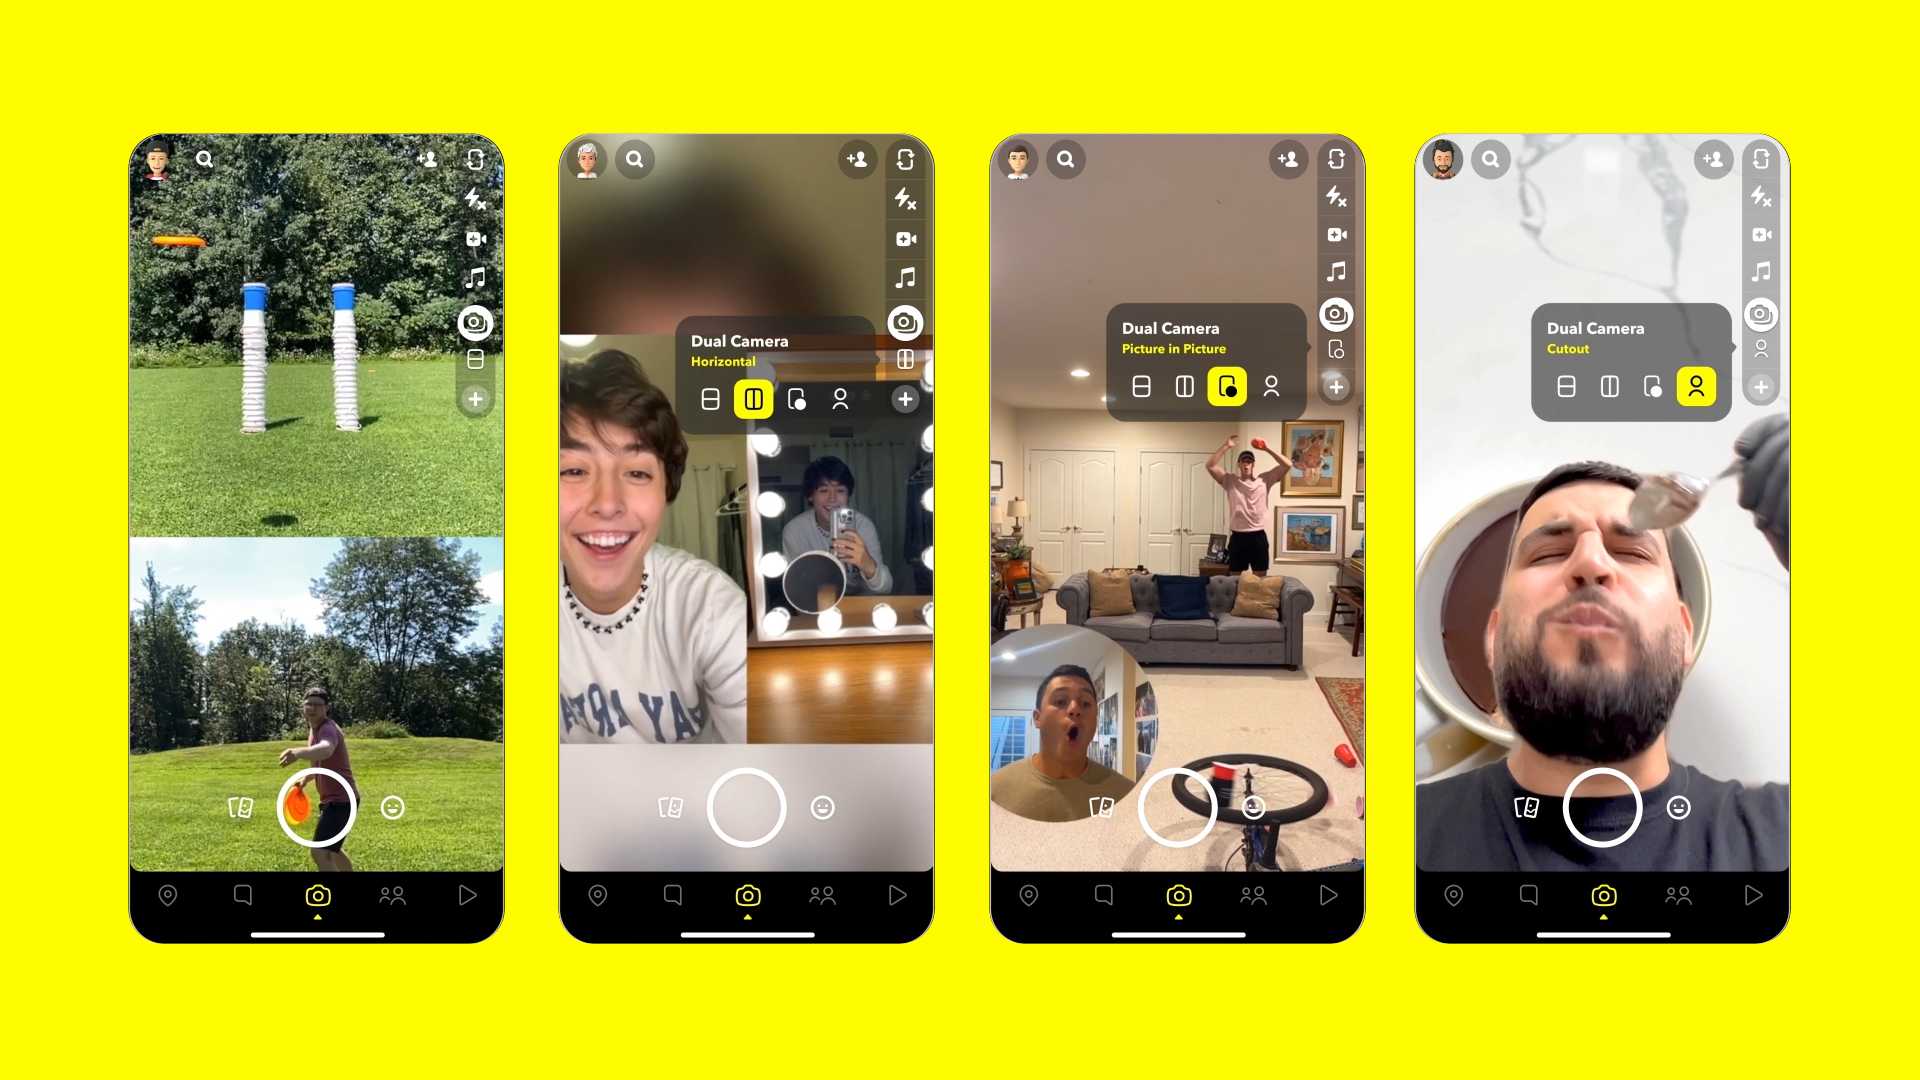 snapchat's dual camera feature uses both front and back cameras